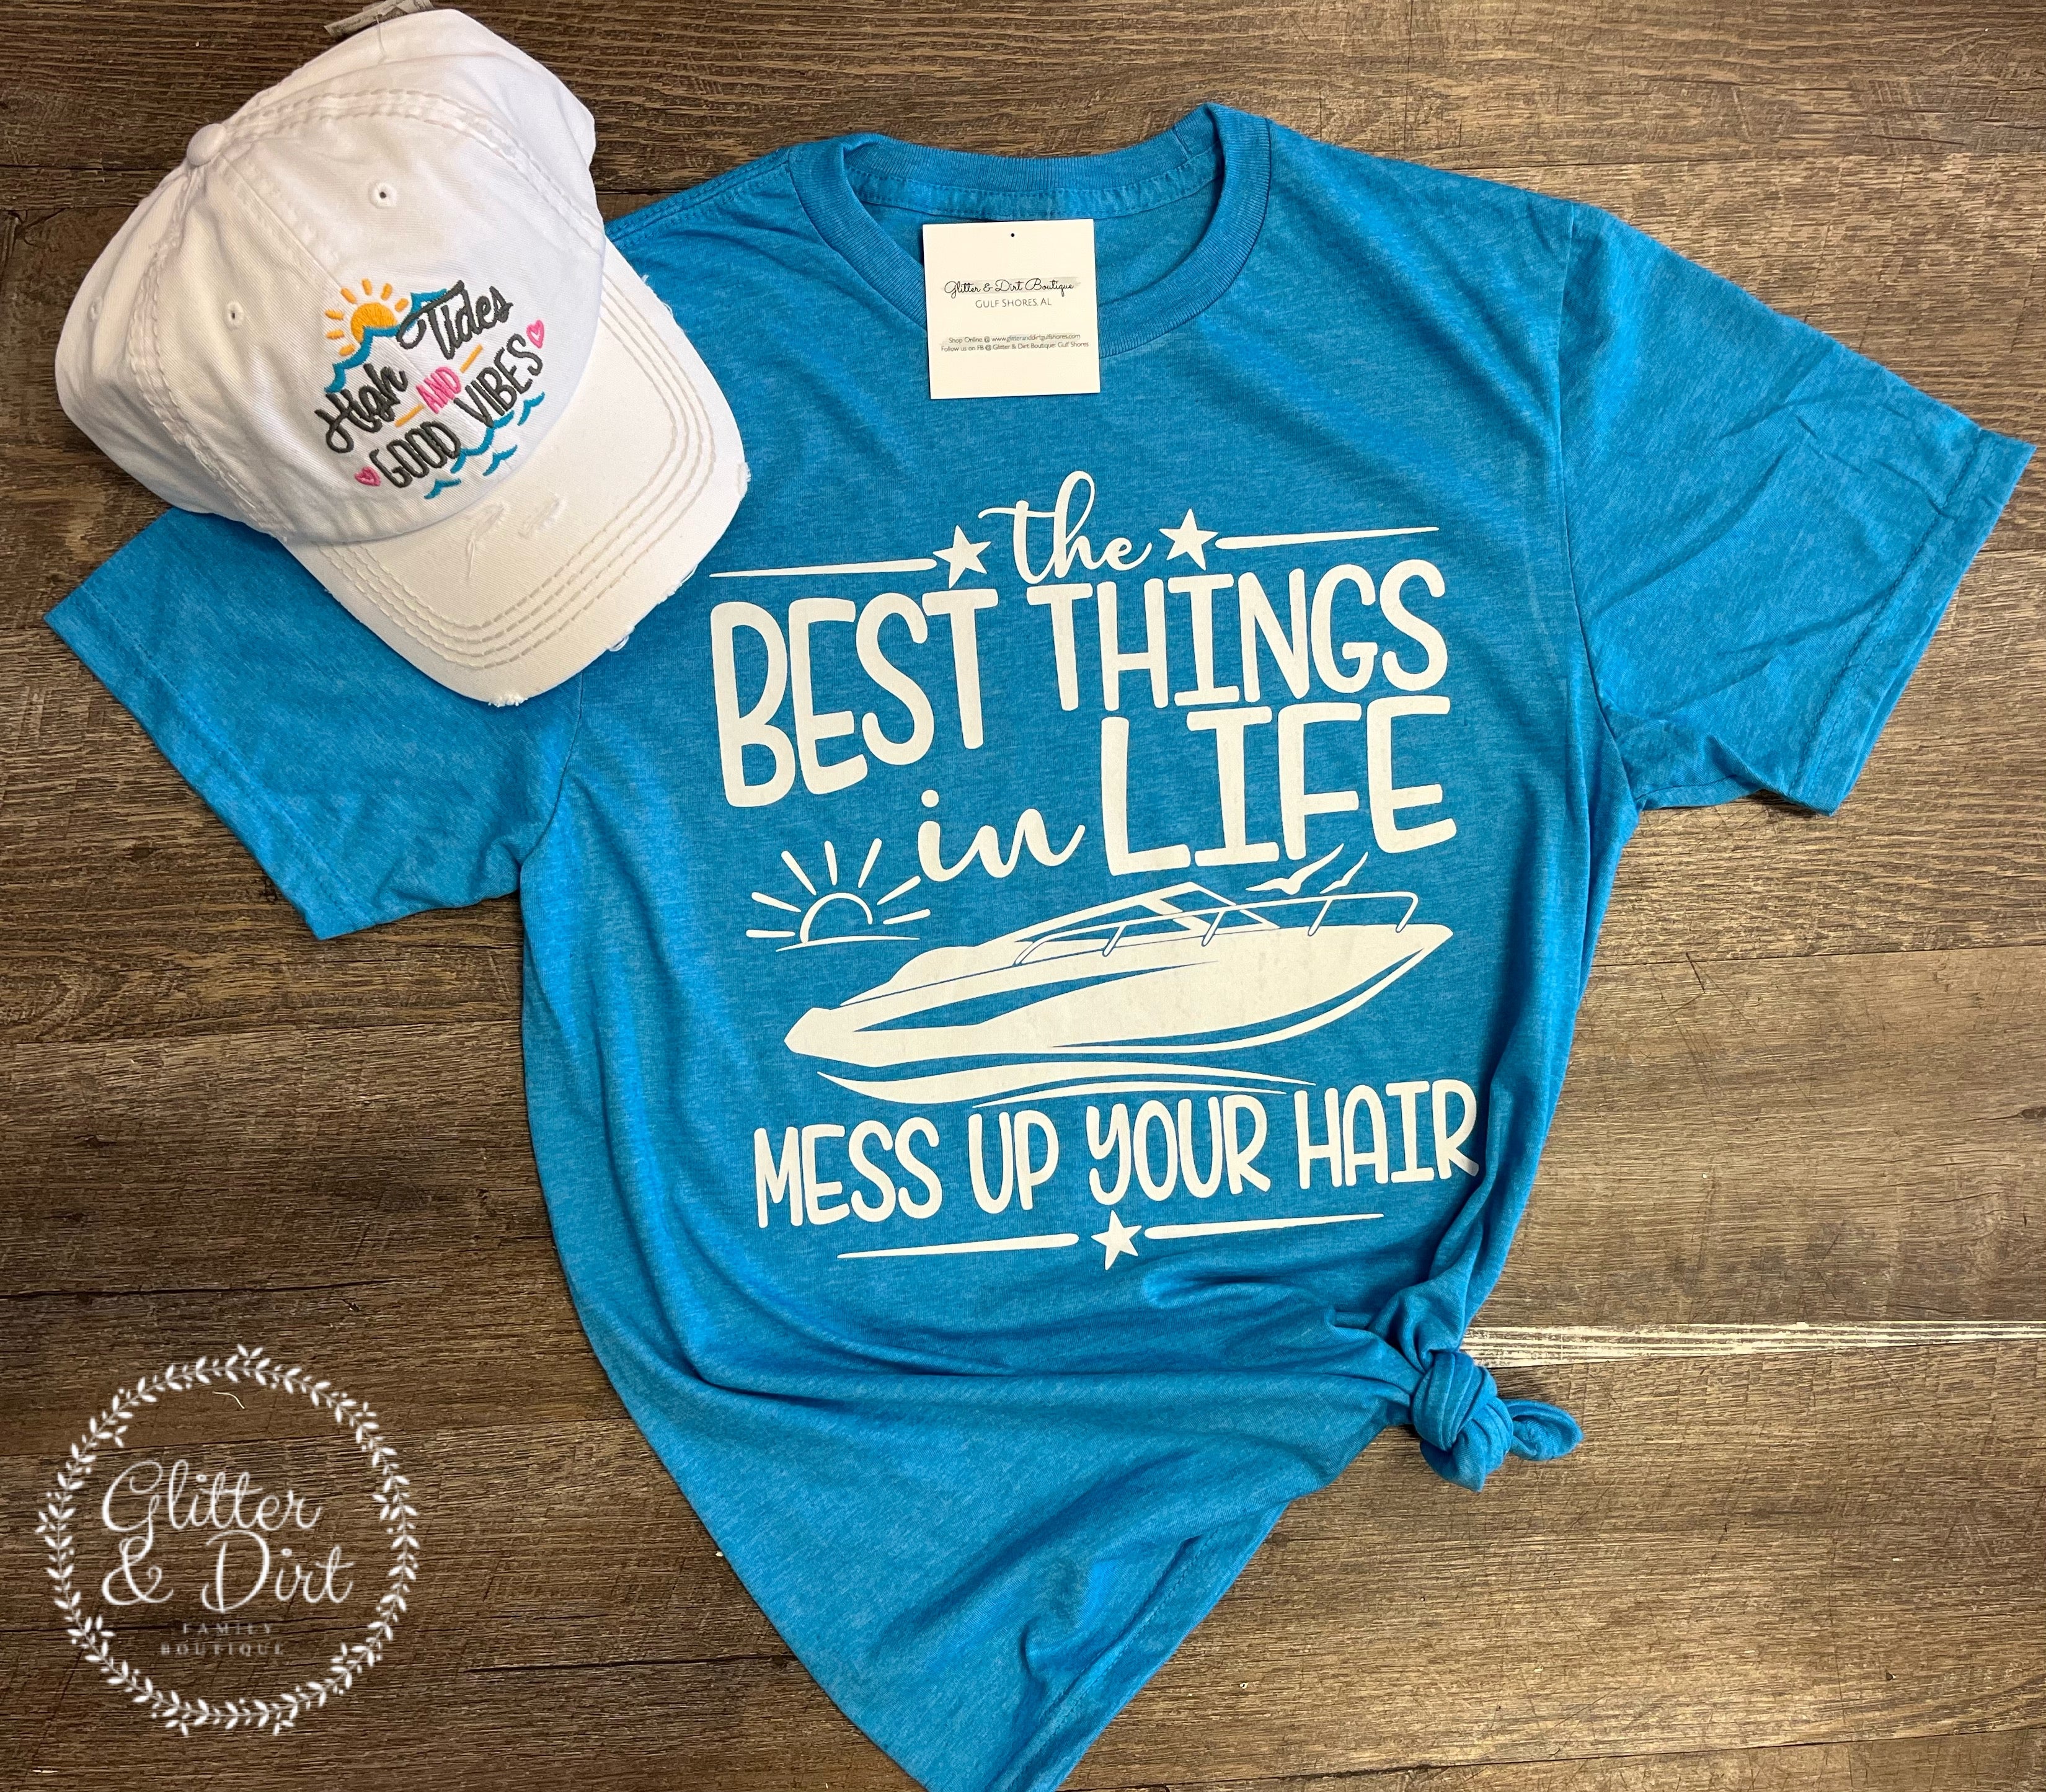 The Best Things in Life Tee